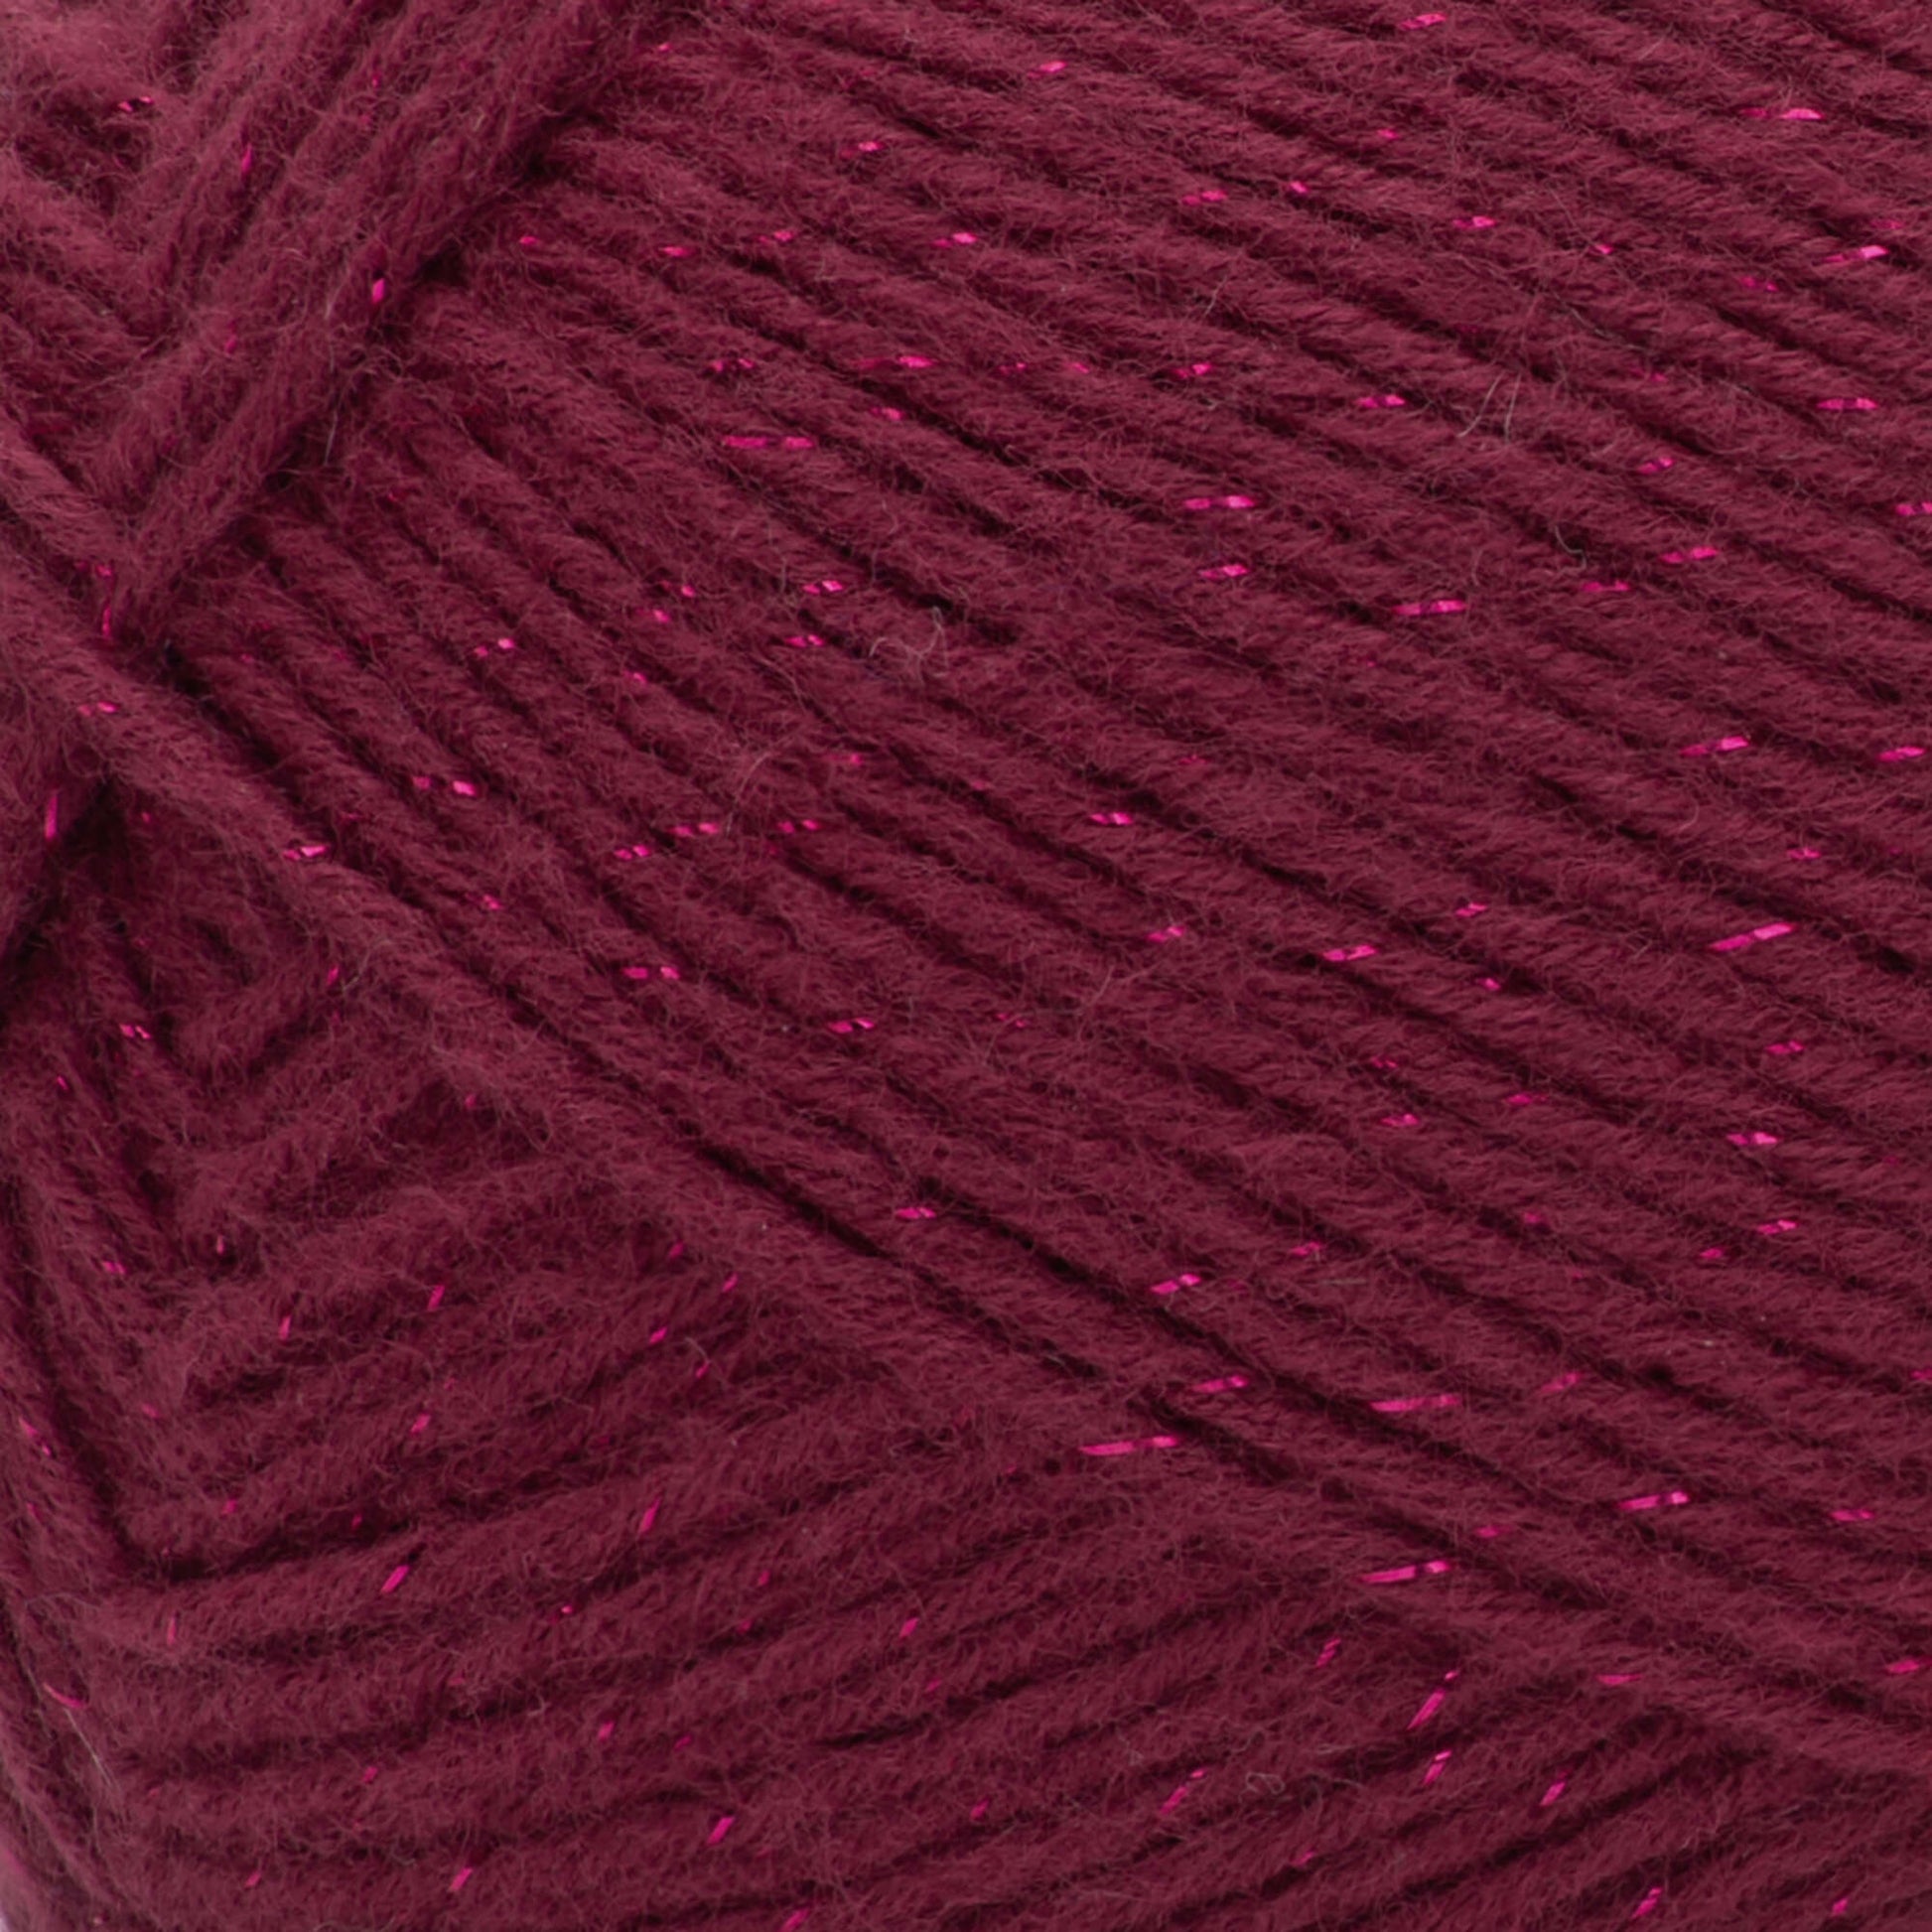 Red Heart Hygge Charm Yarn - Clearance shades Comet